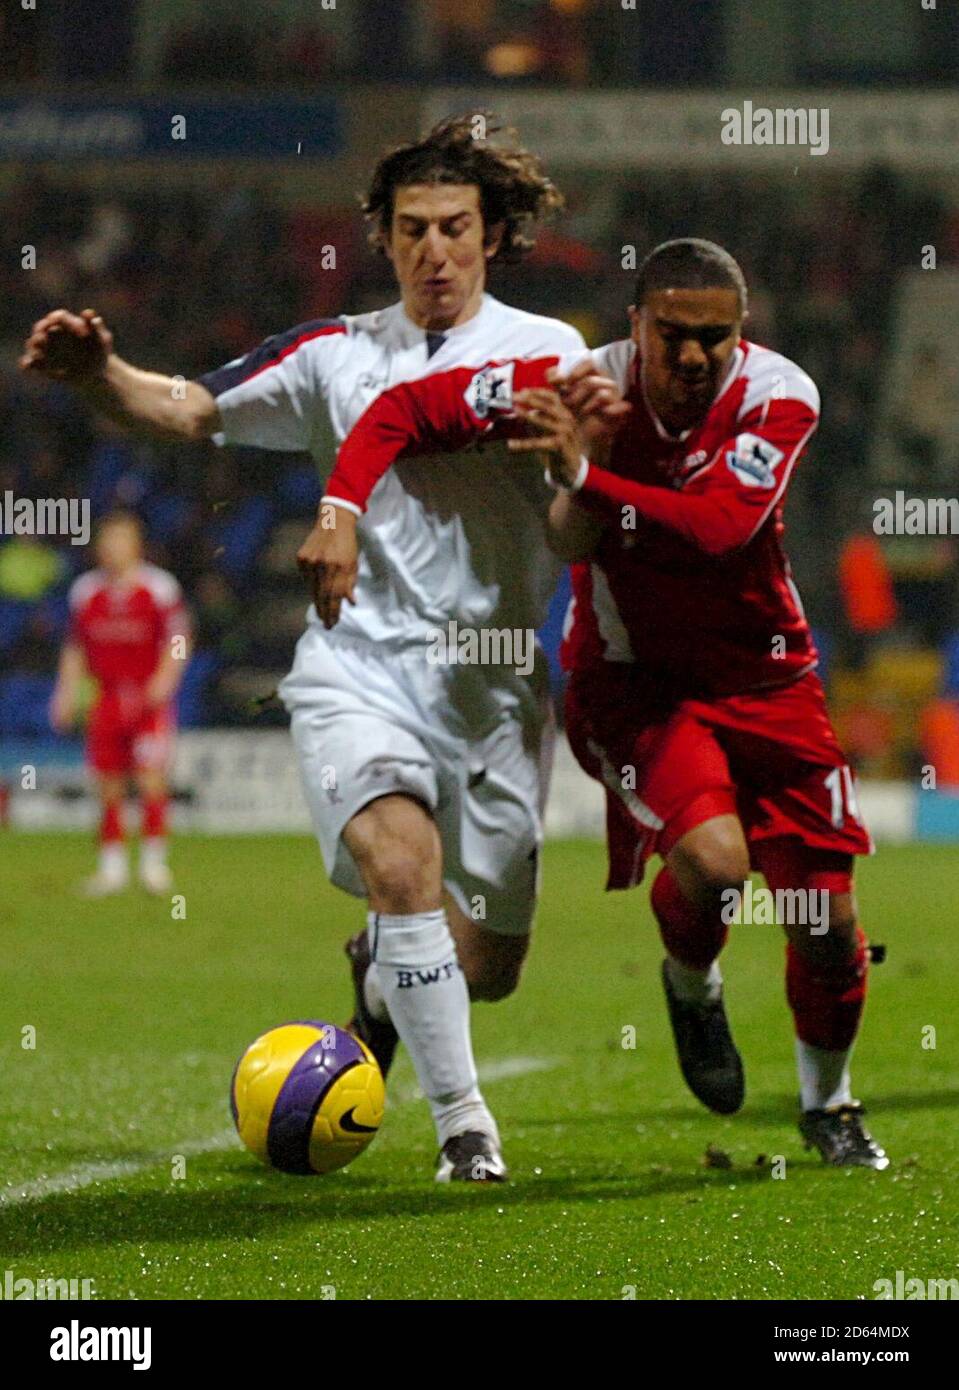 Jerome Thomas, Charlton Athletic (r) and Andranik Teymourian, Bolton Wanderers (l) battle for the ball Stock Photo